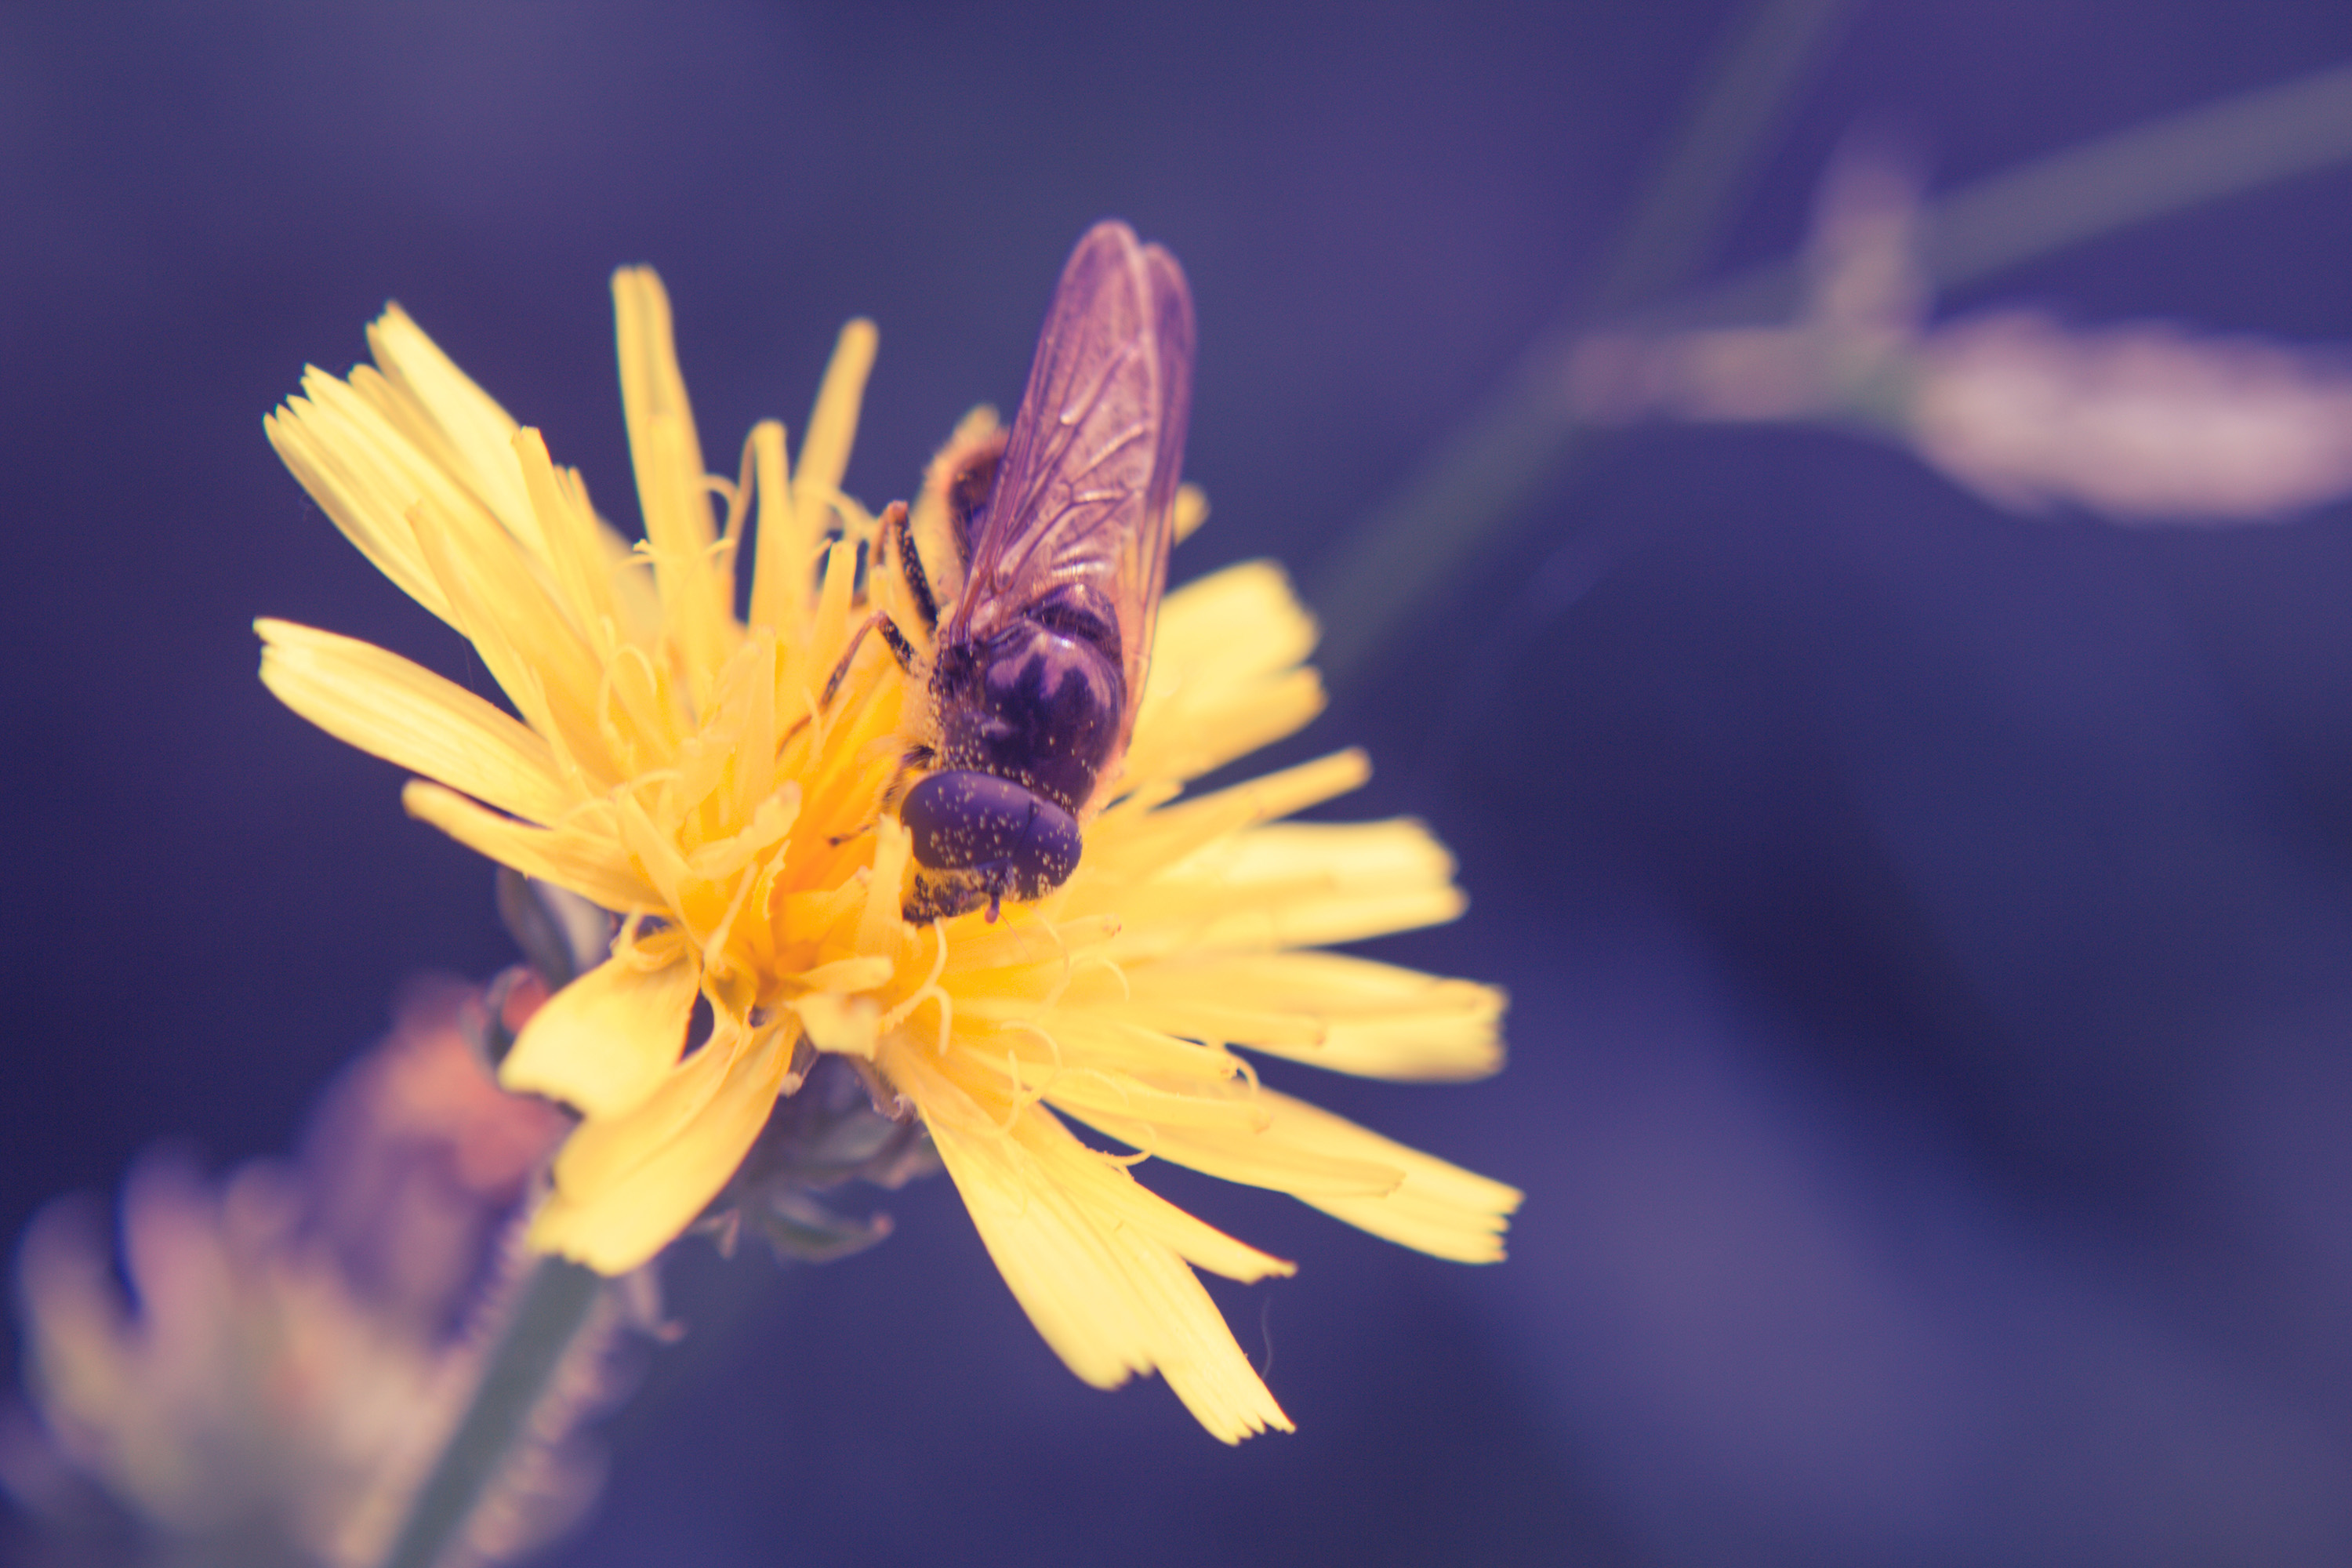 Bee on a flower, Bee, Flower, Insect, Nature, HQ Photo